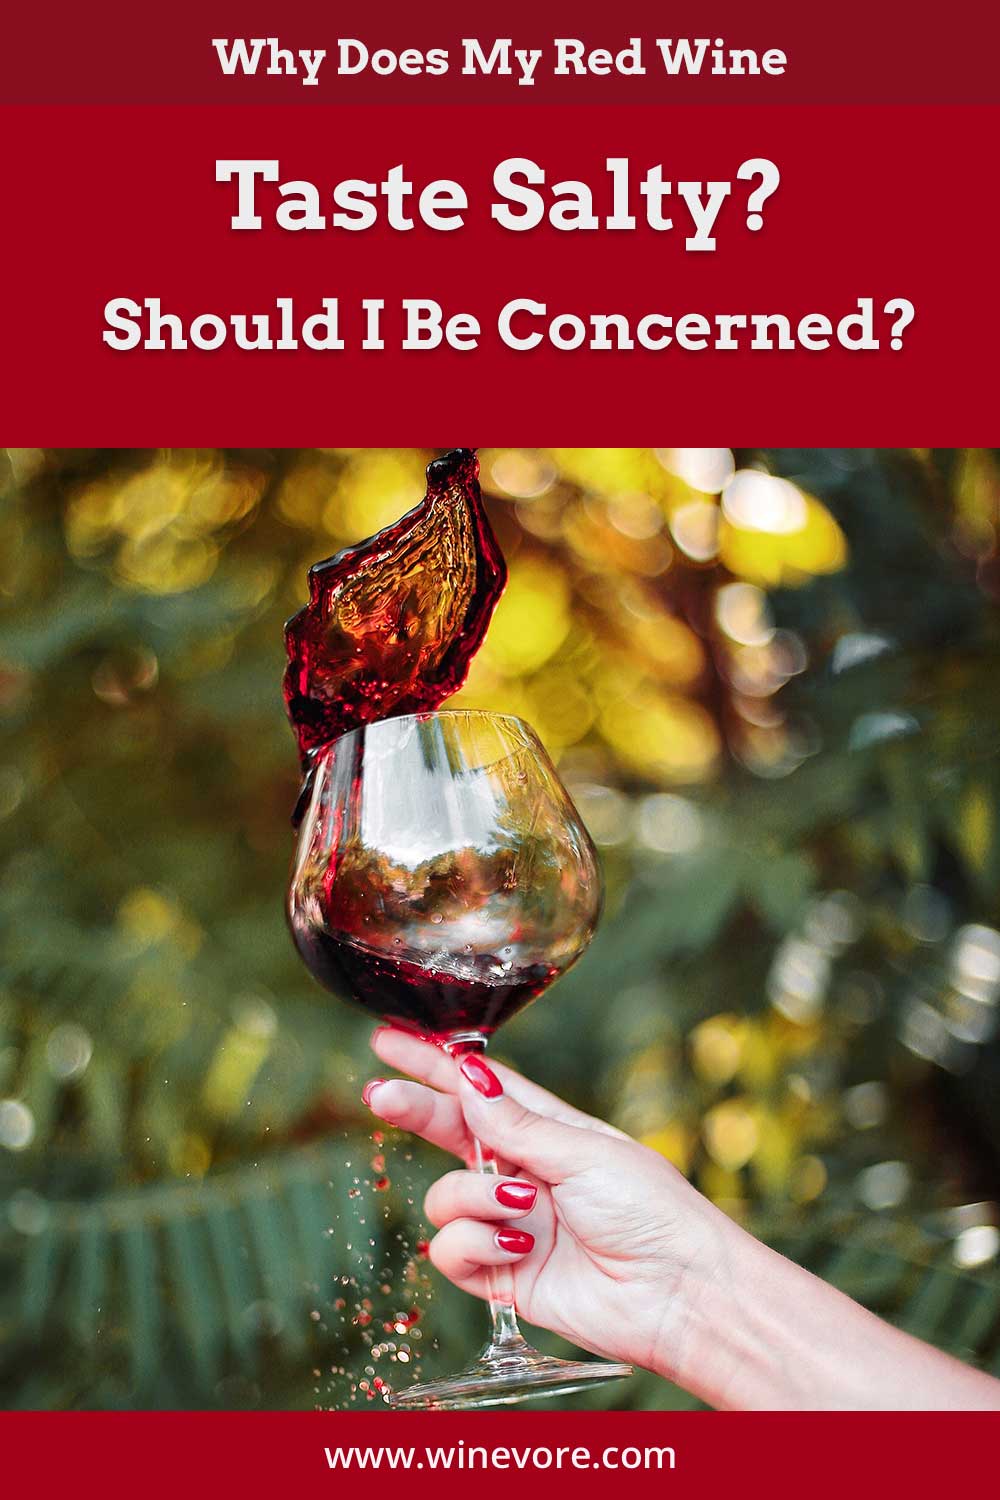 Wine spilling out of a wine glass held by a woman's hand - Why Does My Red Wine Taste Salty?